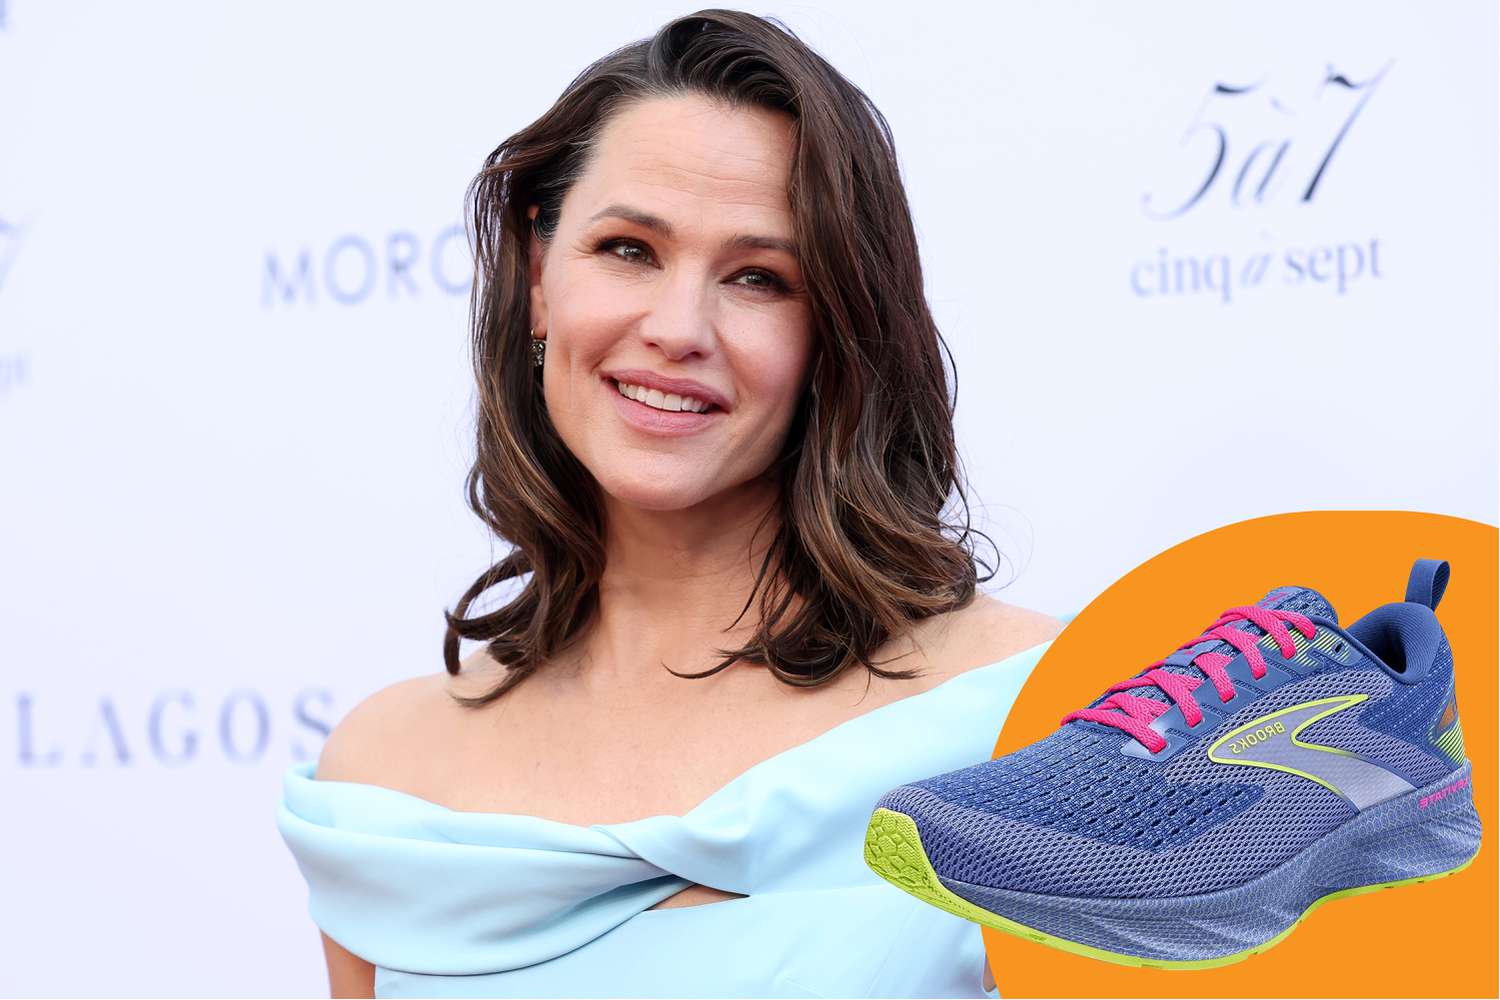 Jennifer Garner Can’t Stop Flocking to This Comfy Sneaker Brand, and Amazon Discounts Are Up to 45% Off